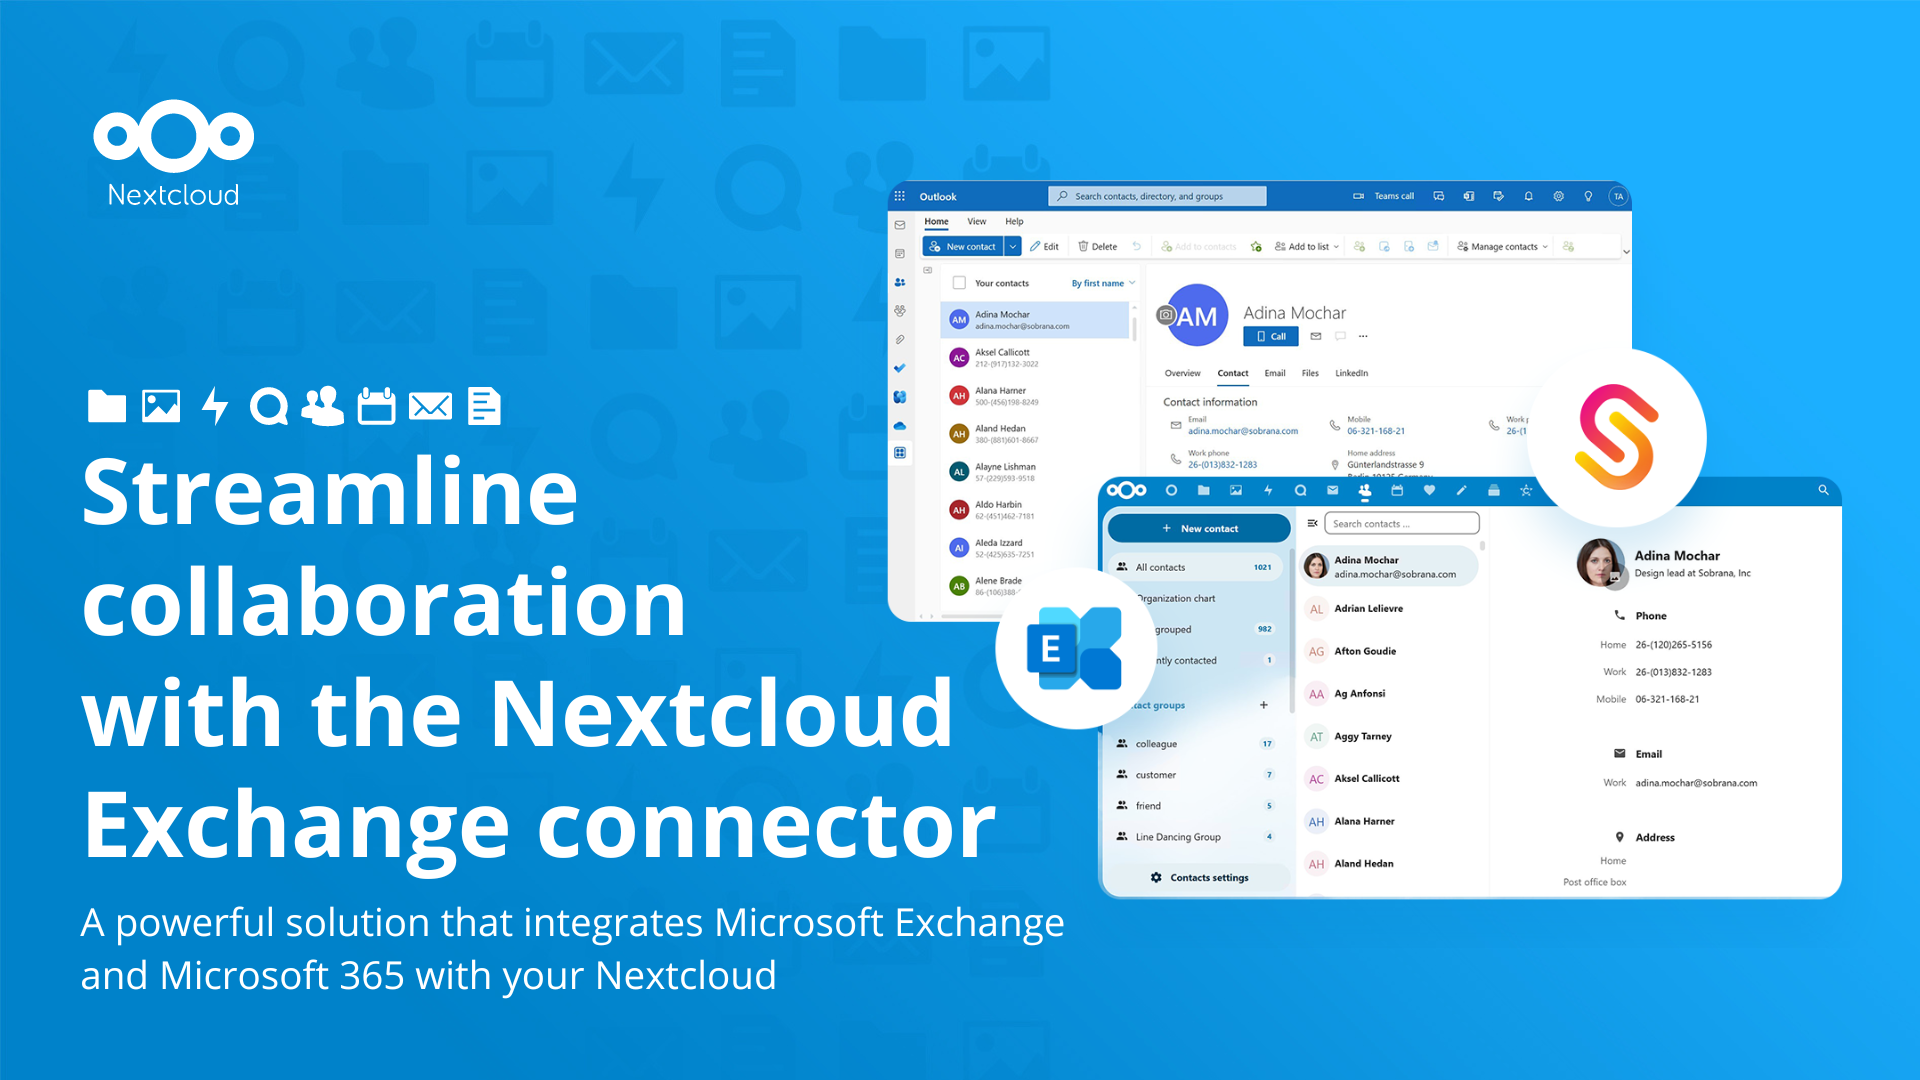 Streamline collaboration with the Nextcloud Exchange connector